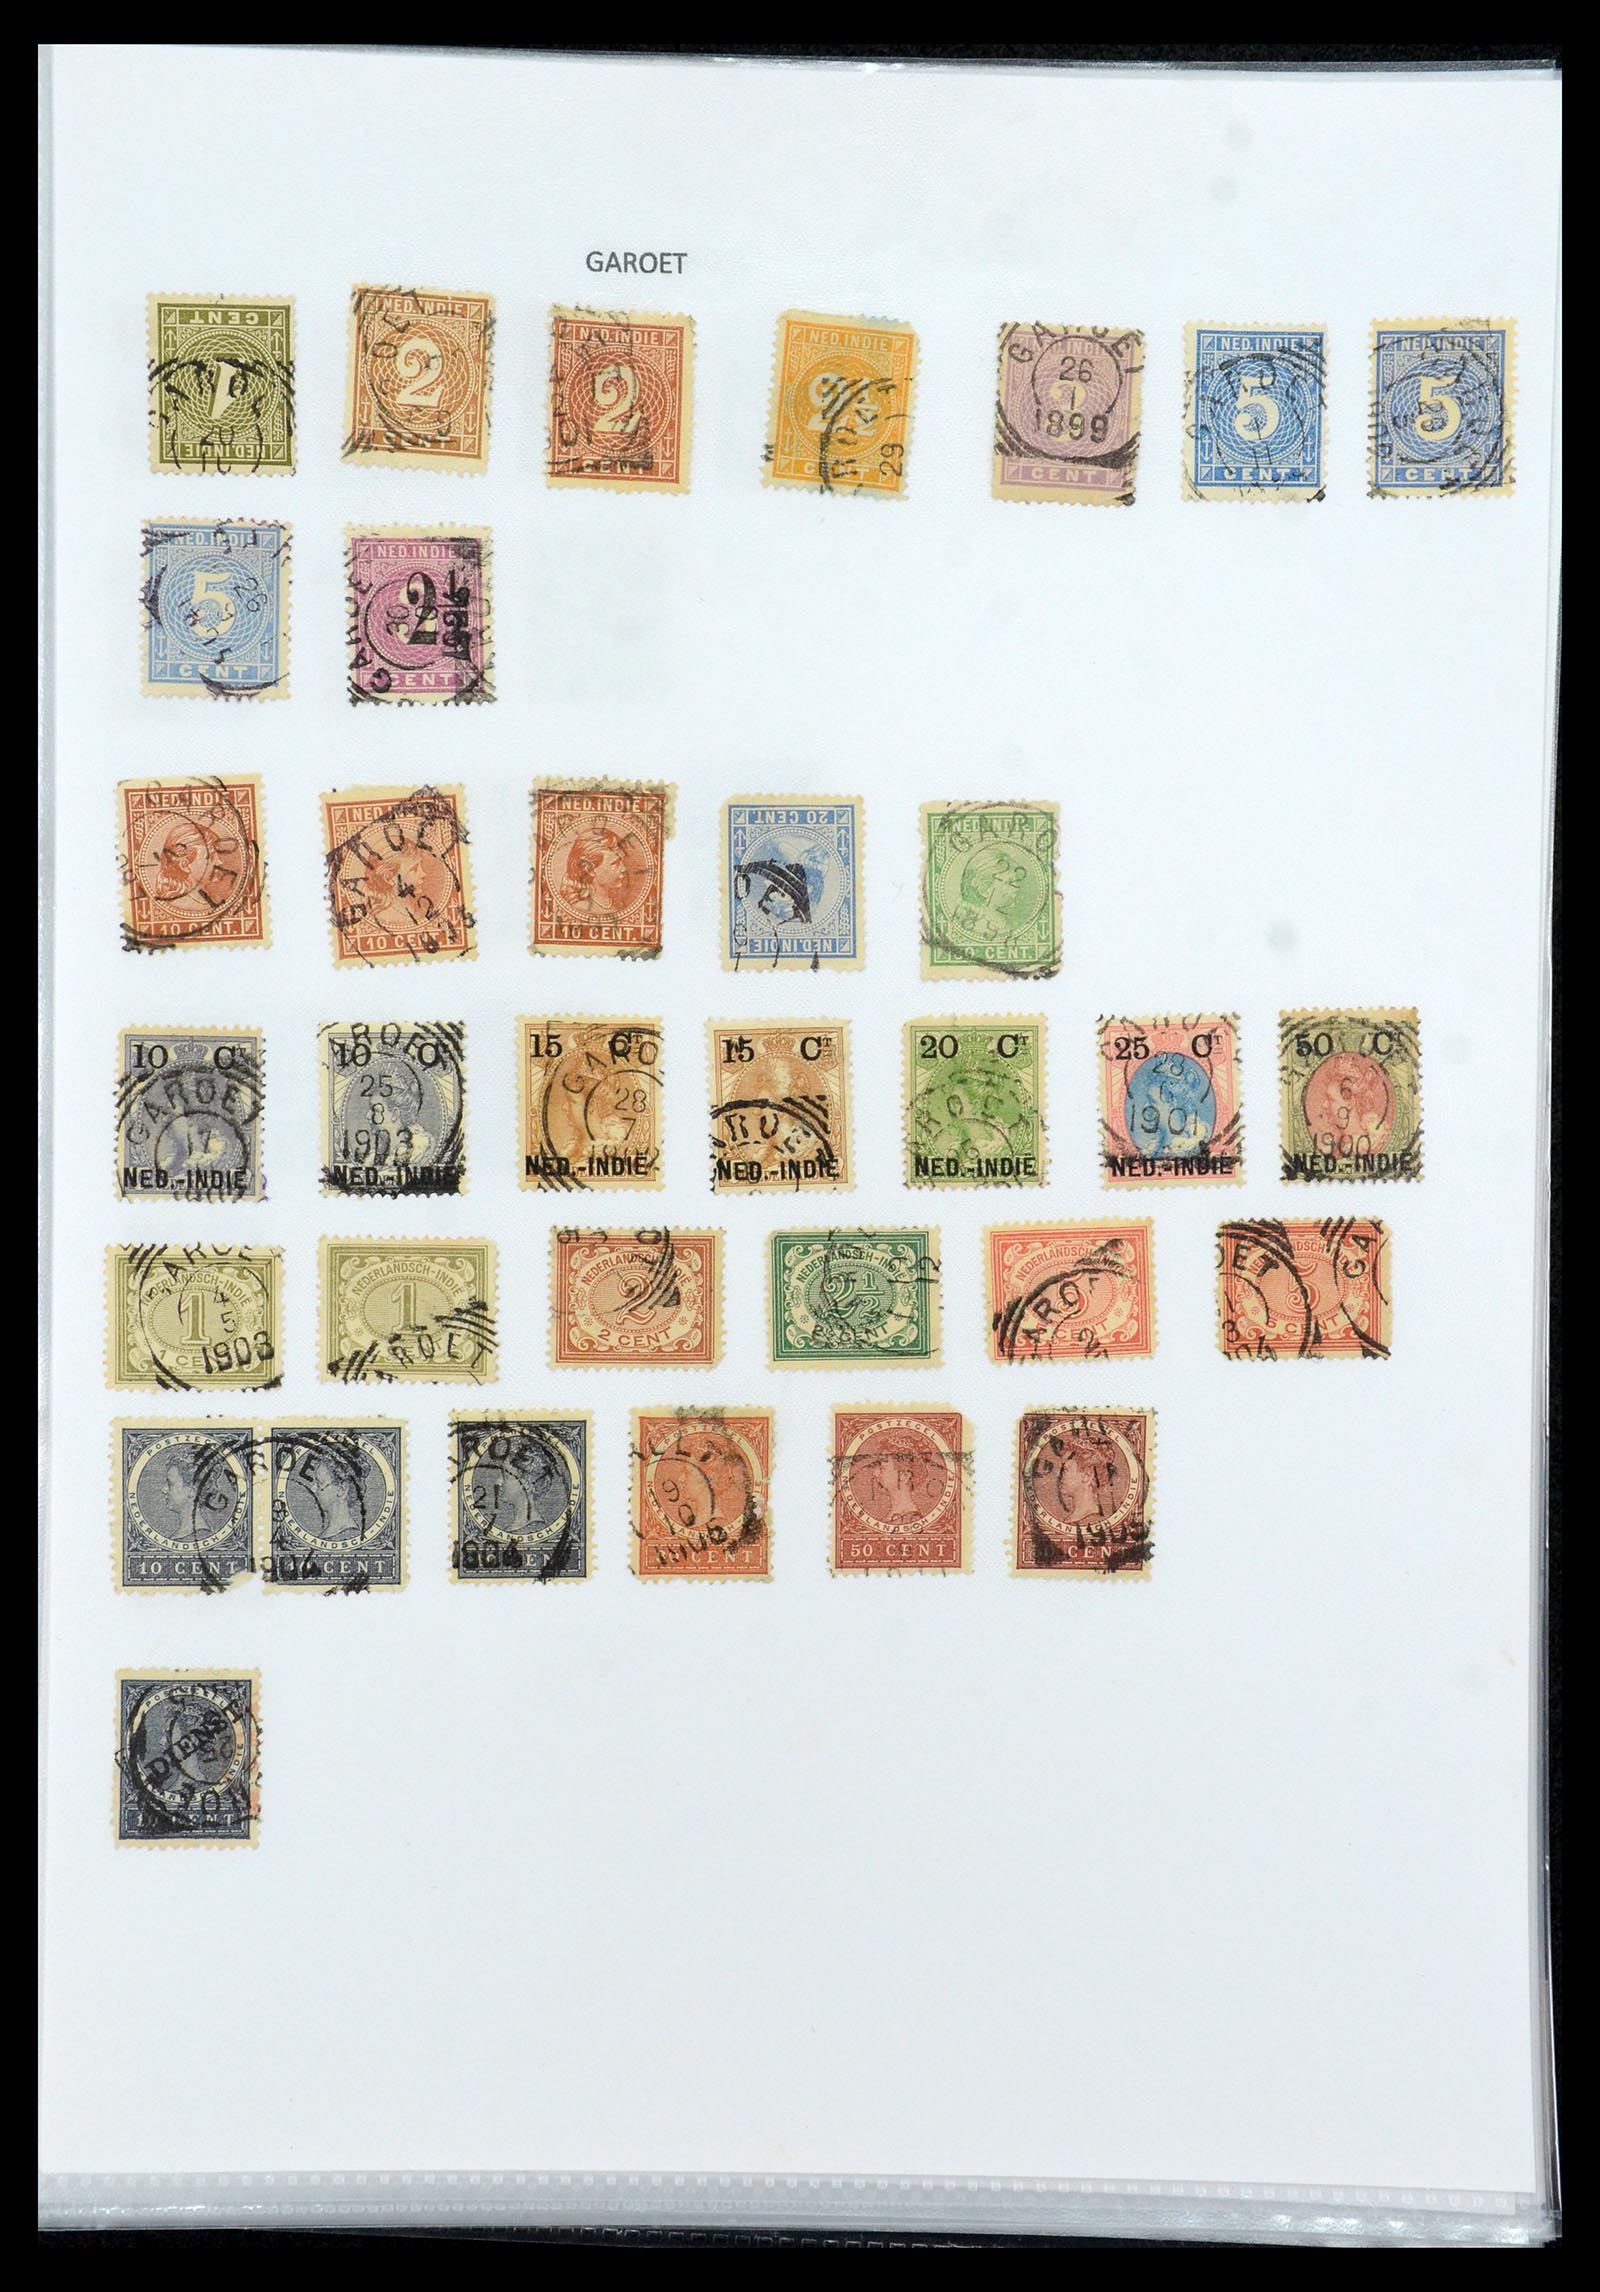 36432 053 - Stamp collection 36432 Dutch east Indies square cancels.